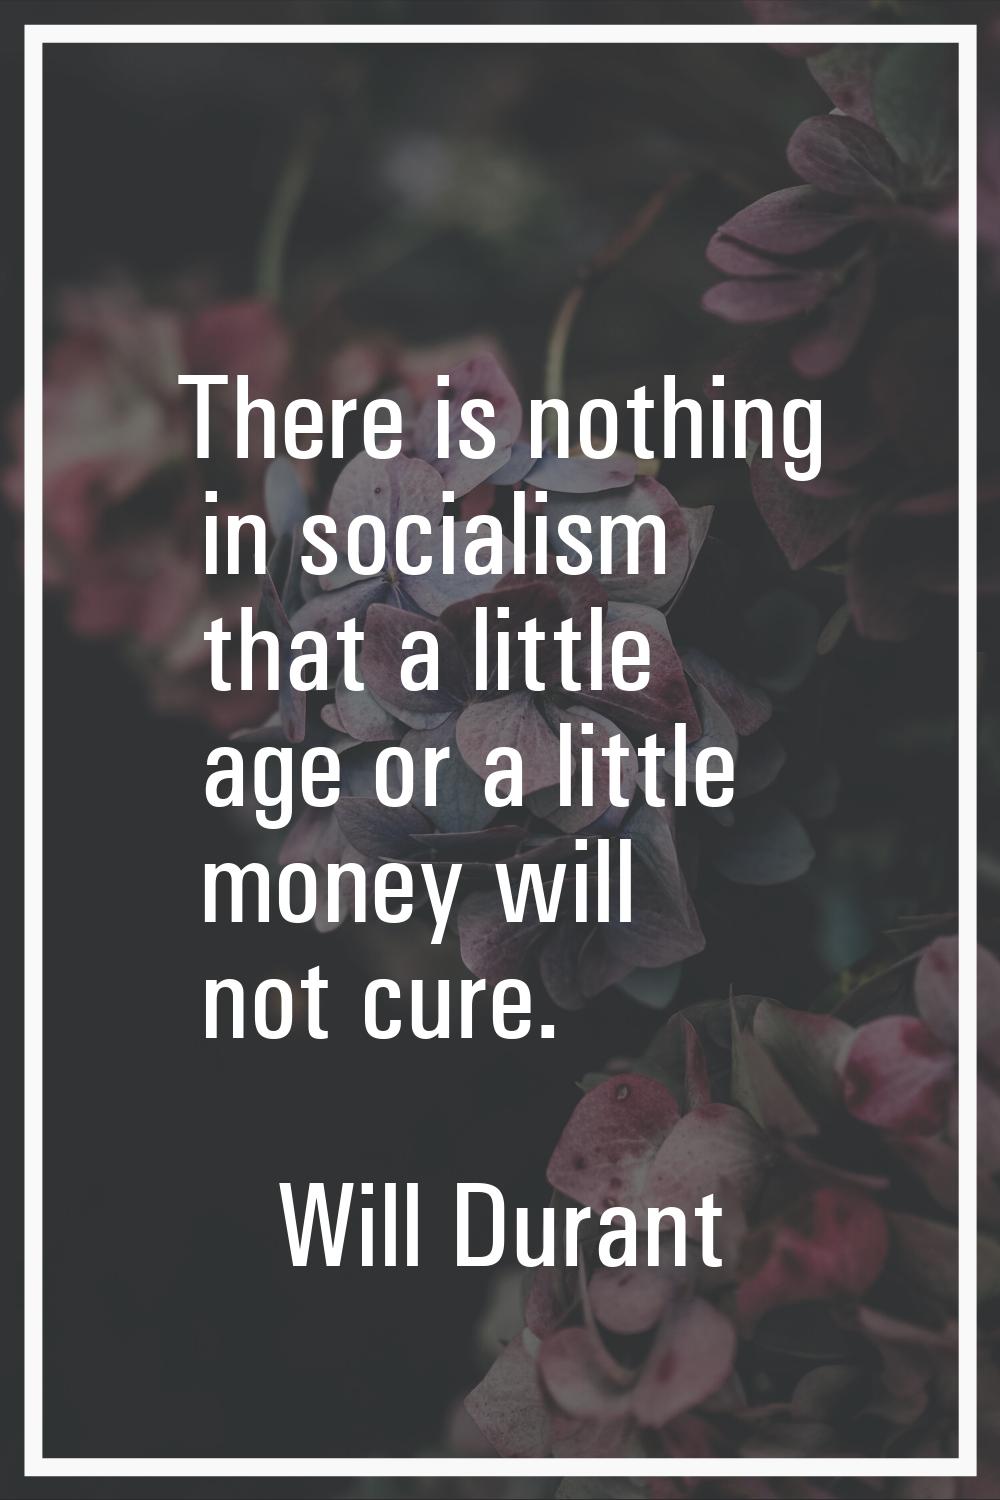 There is nothing in socialism that a little age or a little money will not cure.